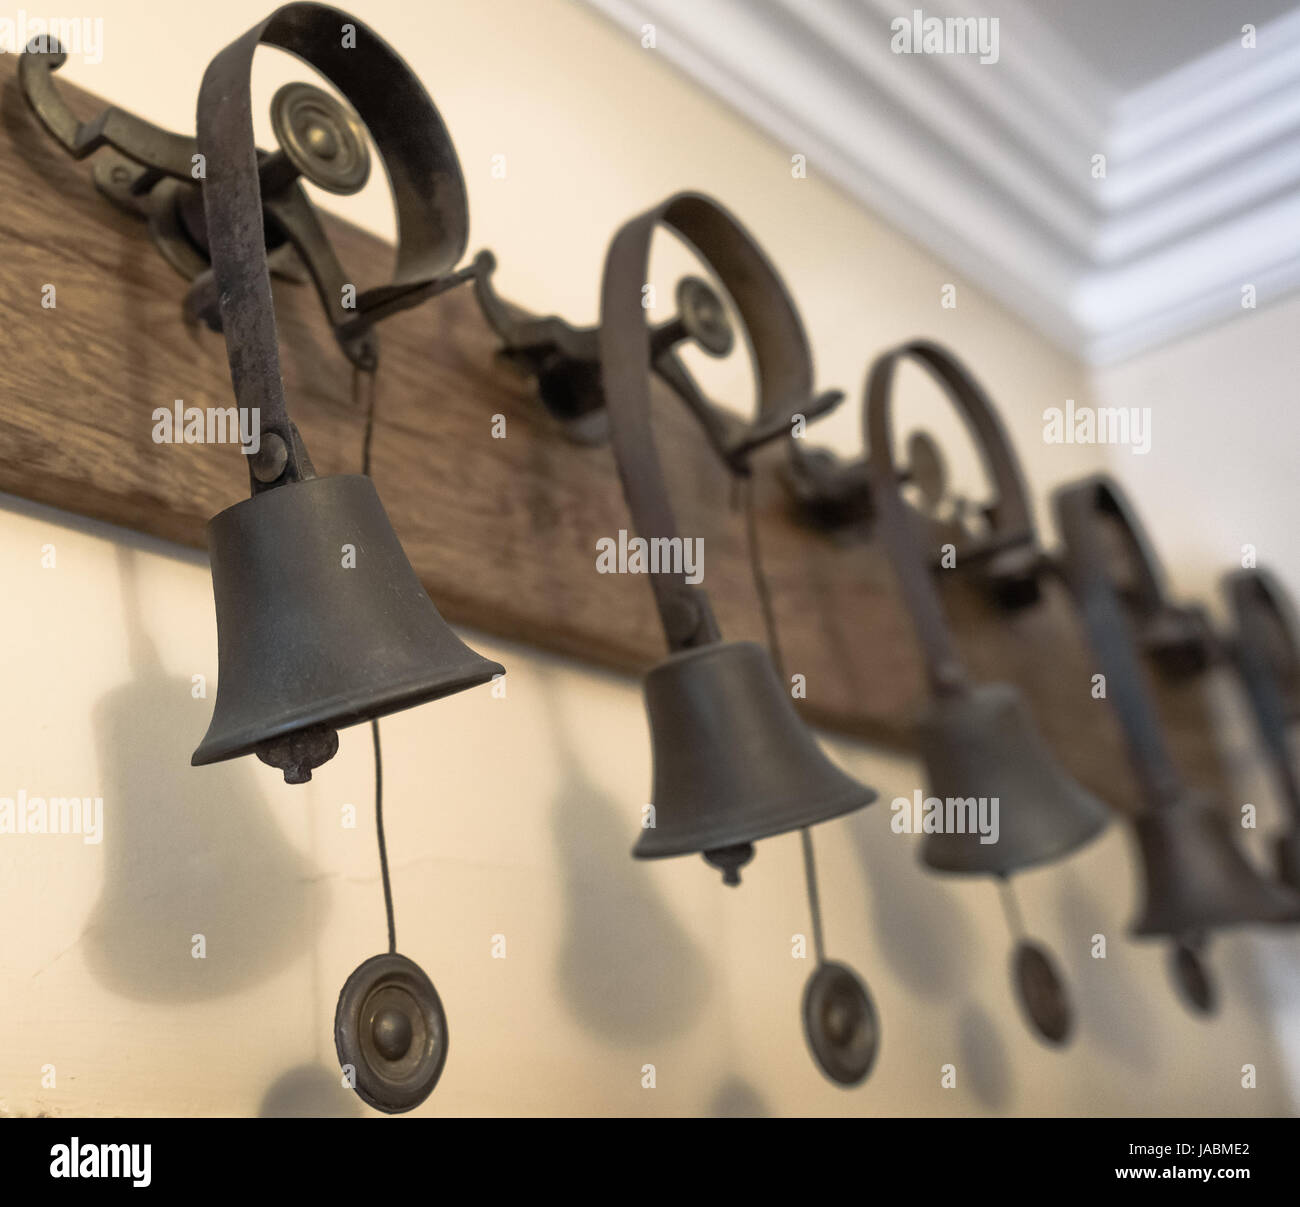 Servant's bells in a large old house. Stock Photo